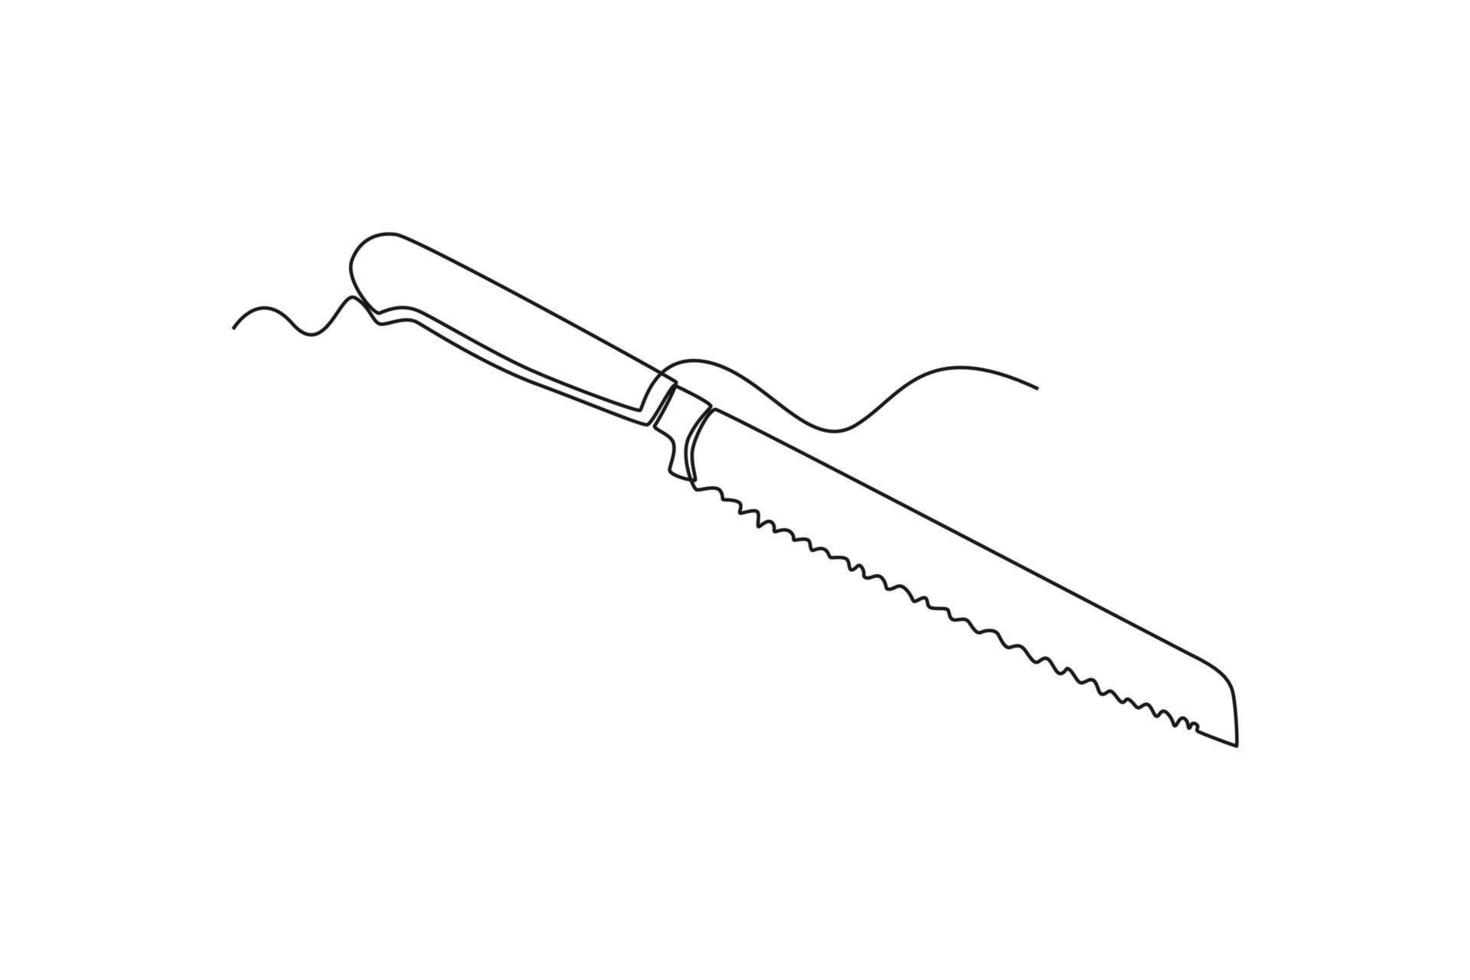 Single one line drawing bread knife. Tableware concept. Continuous line draw design graphic vector illustration.